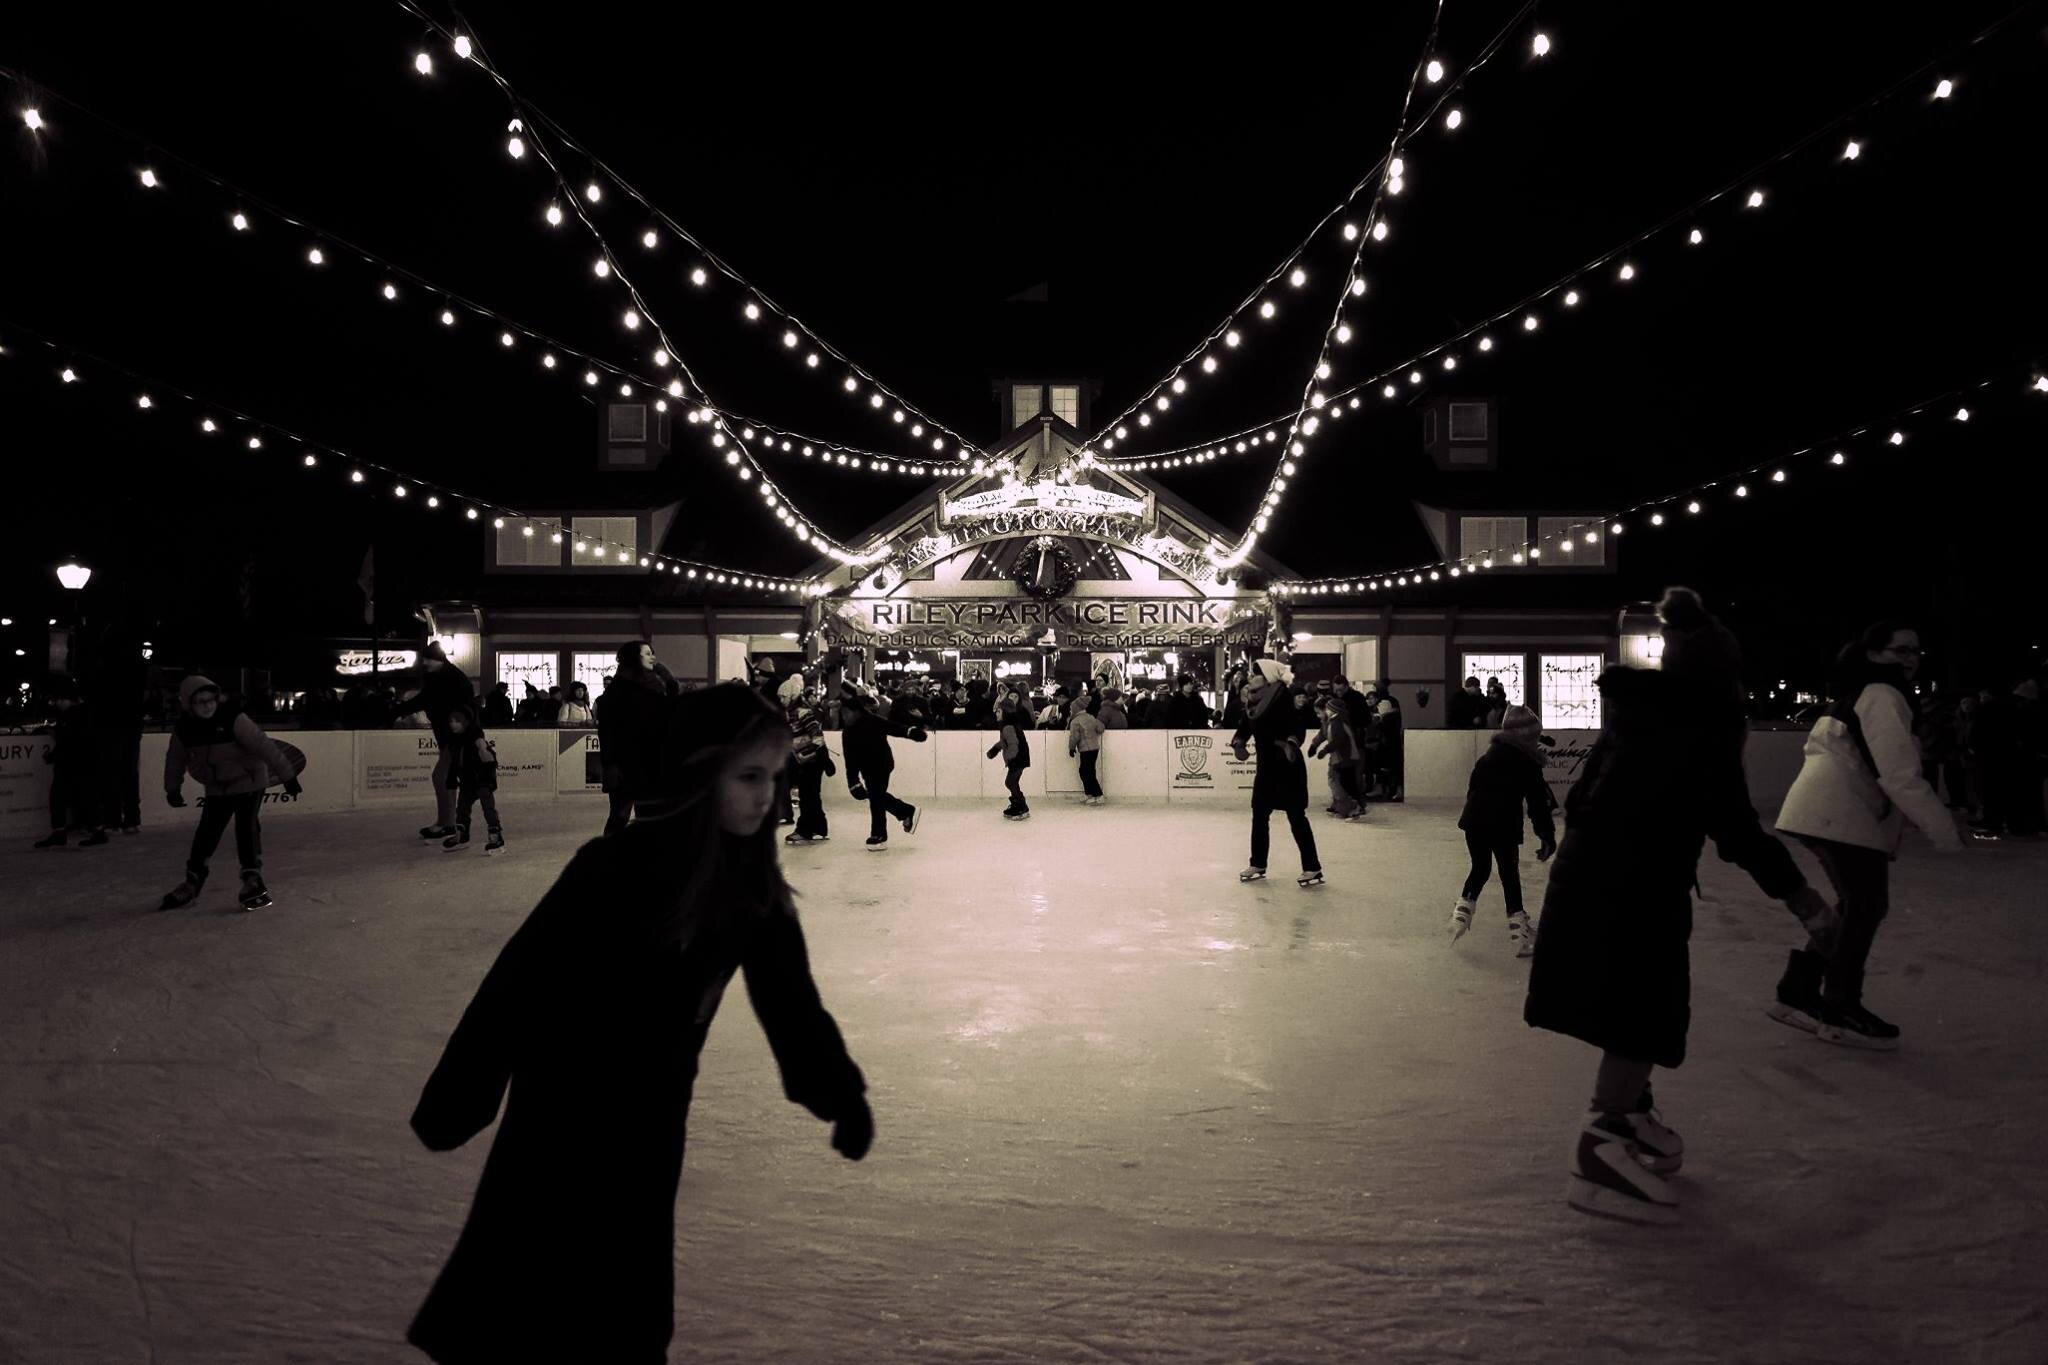 “We’re thrilled to have the rink open in time for the holidays,” says Melissa Andrade.